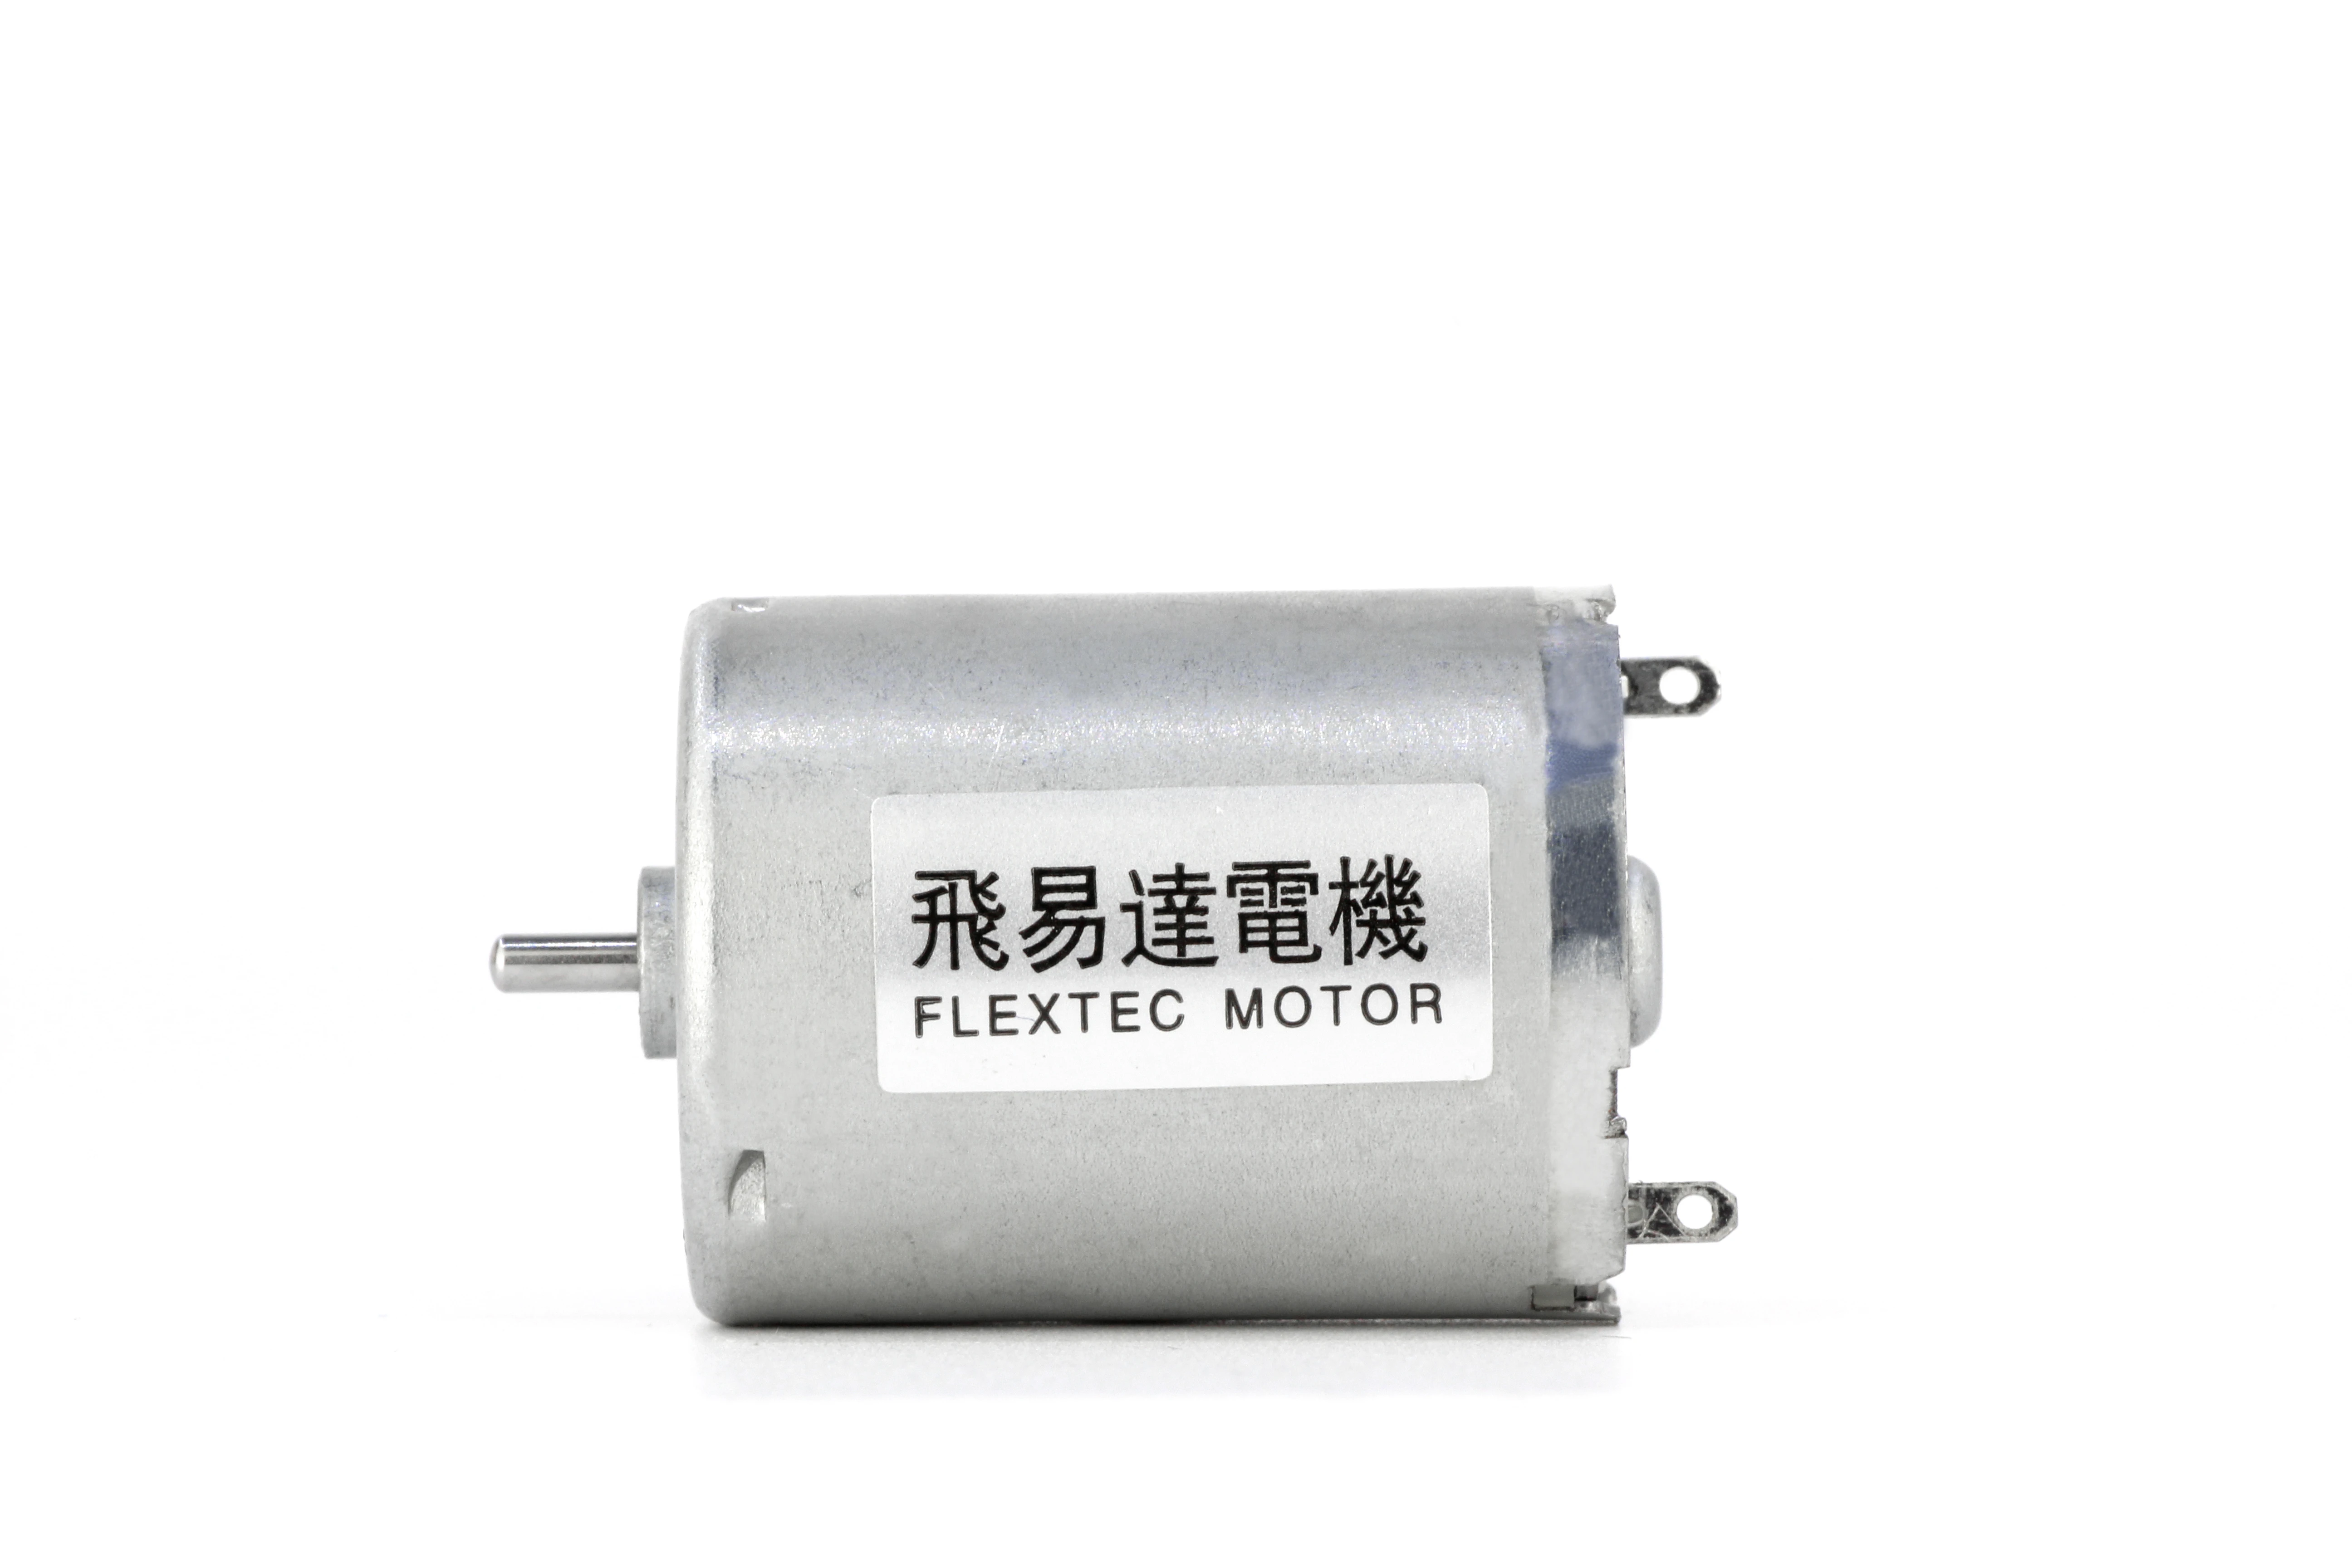 DC 370 Rubber Magnet Motor Gearbox Wiper 12v Dc Electric Motor For Bicycle